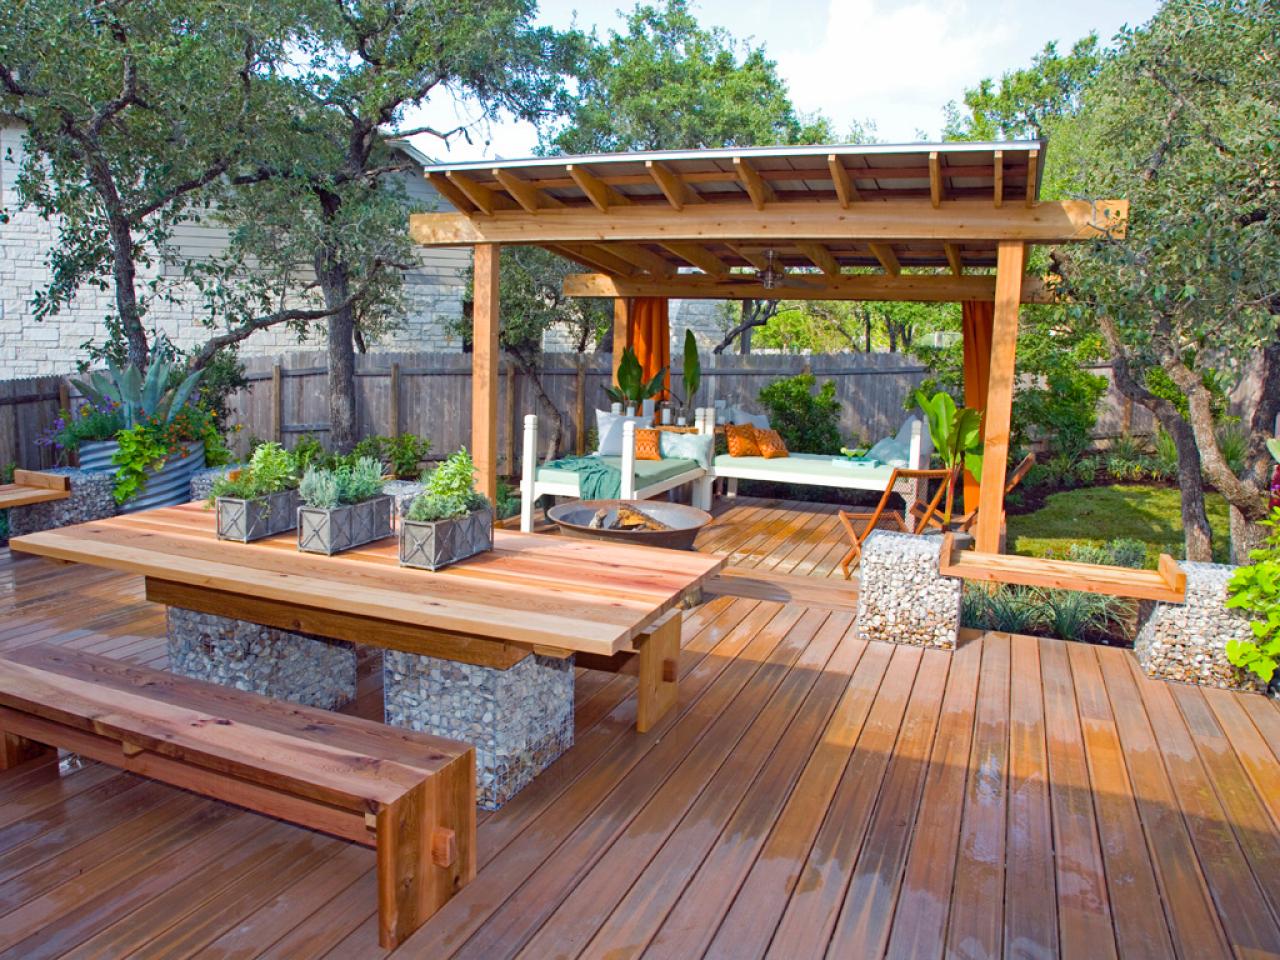 Contemporary Wood Deck and Outdoor Living Area | HGTV